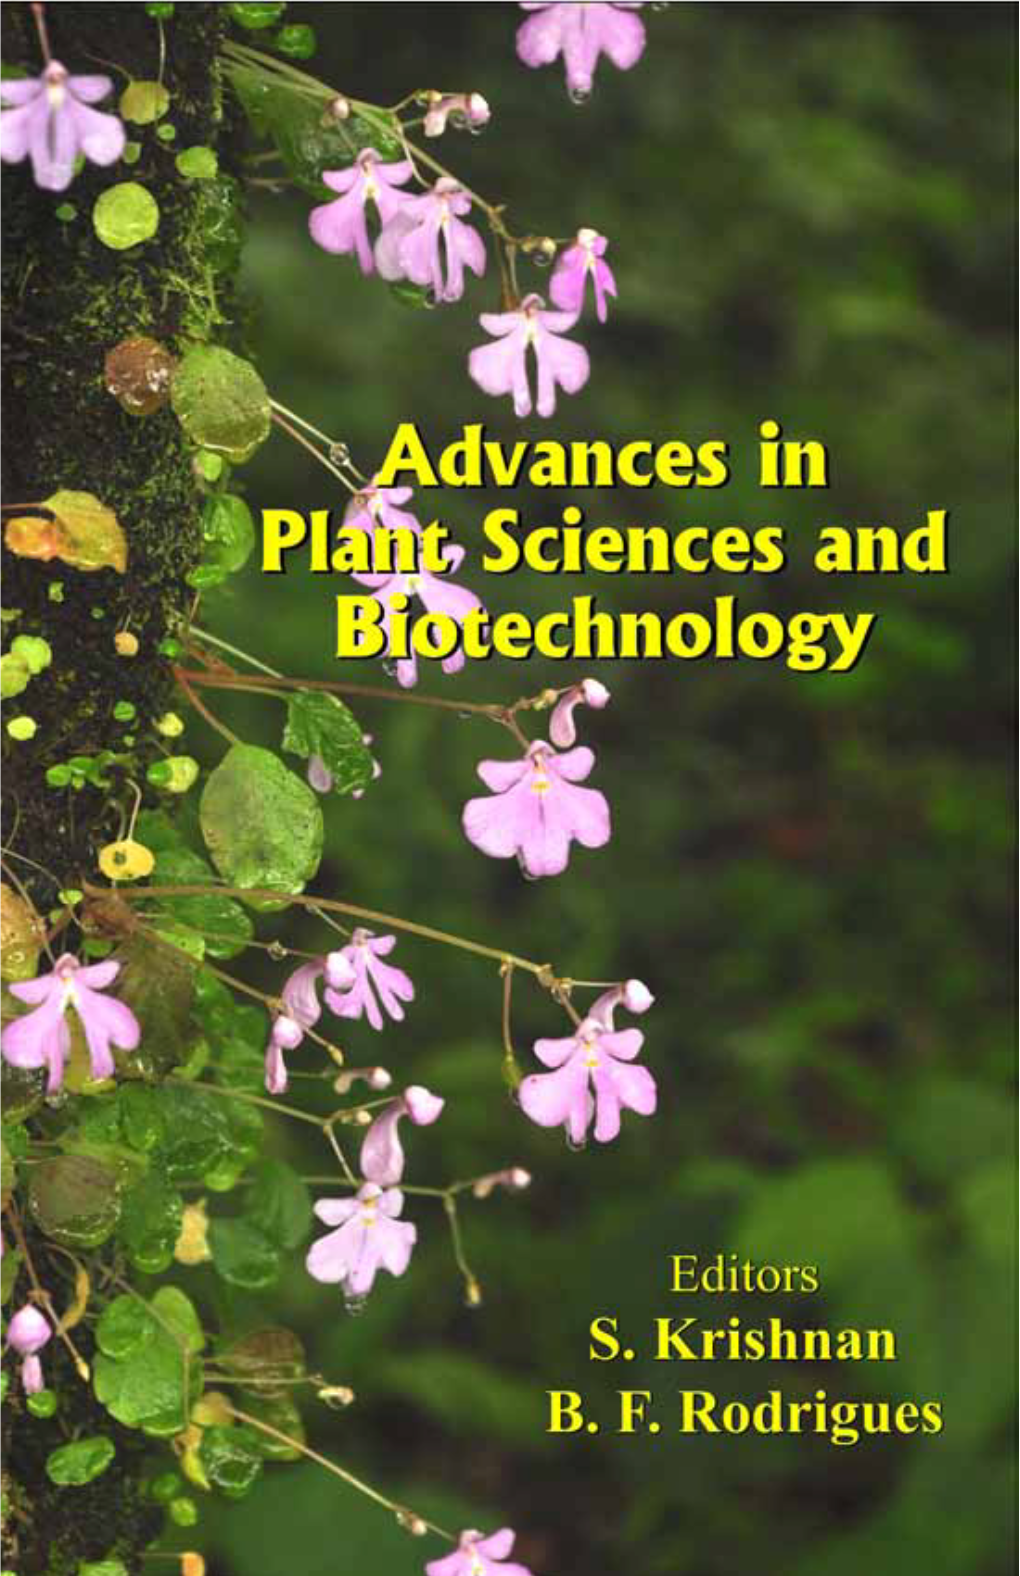 Advances in Plant Sciences and Biotechnology